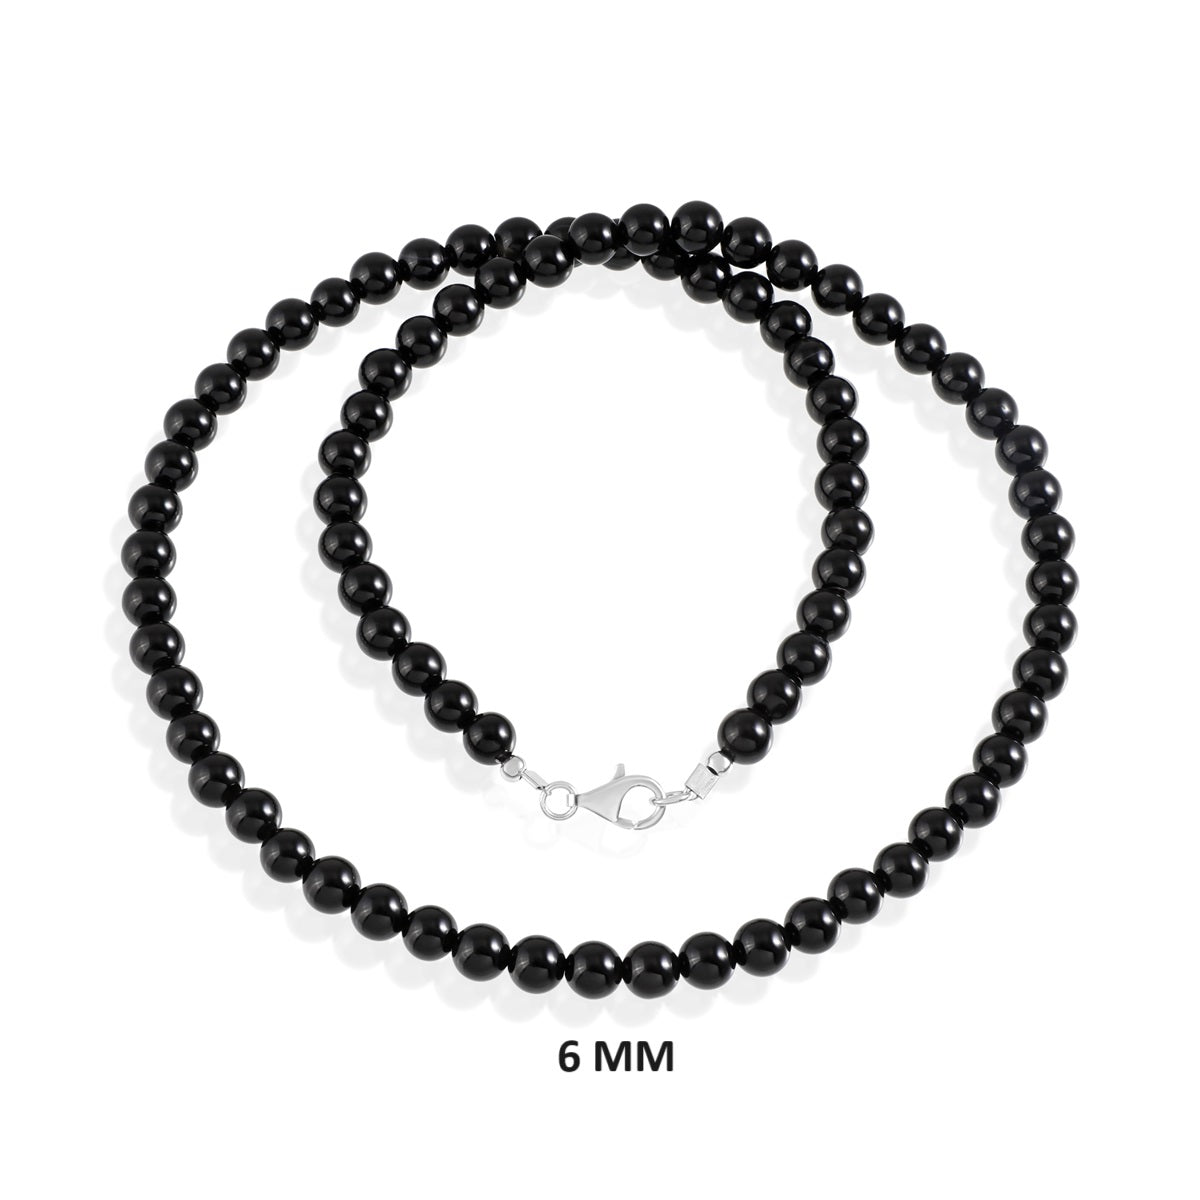 Black Onyx Beads Silver Necklace: Strength and Protection